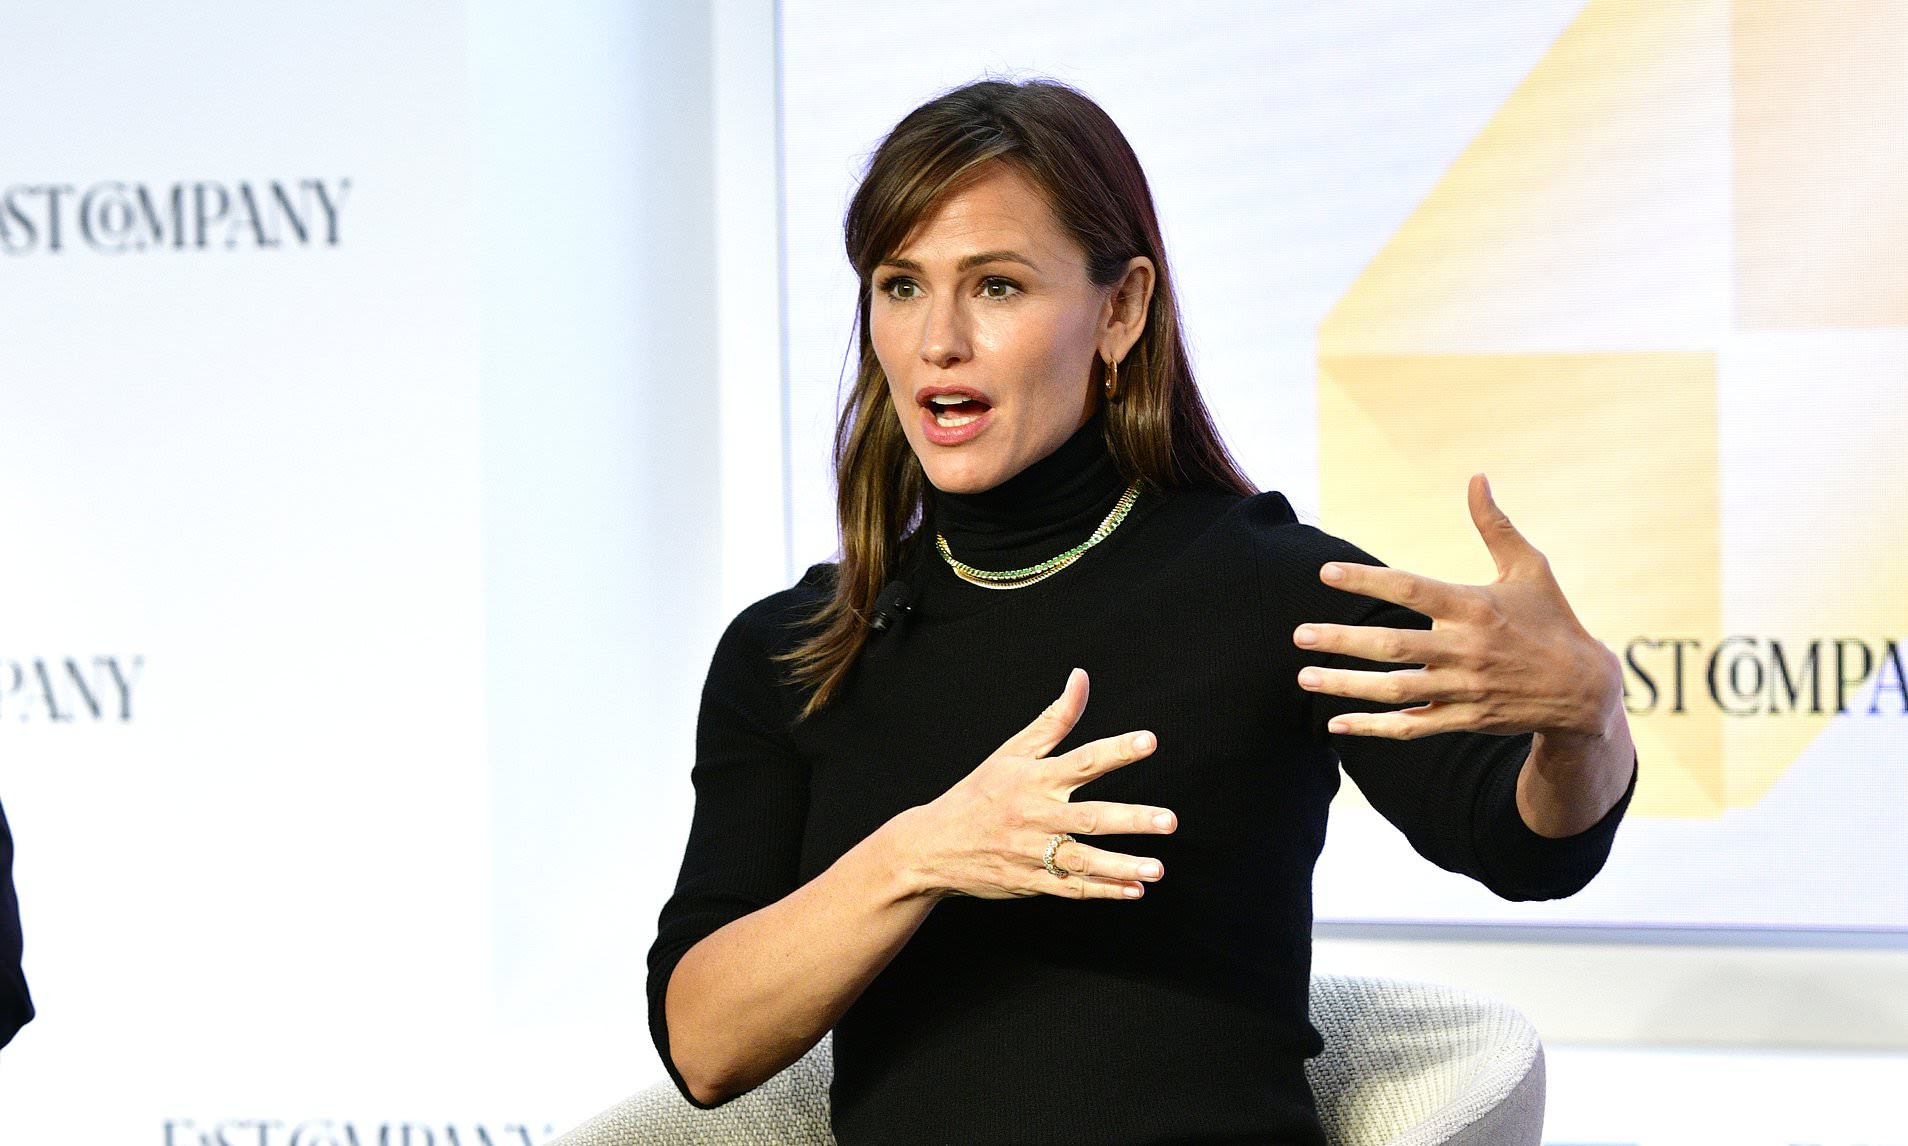 Jennifer Garner, 50, says her company has gone from $1M a year to $100M a year